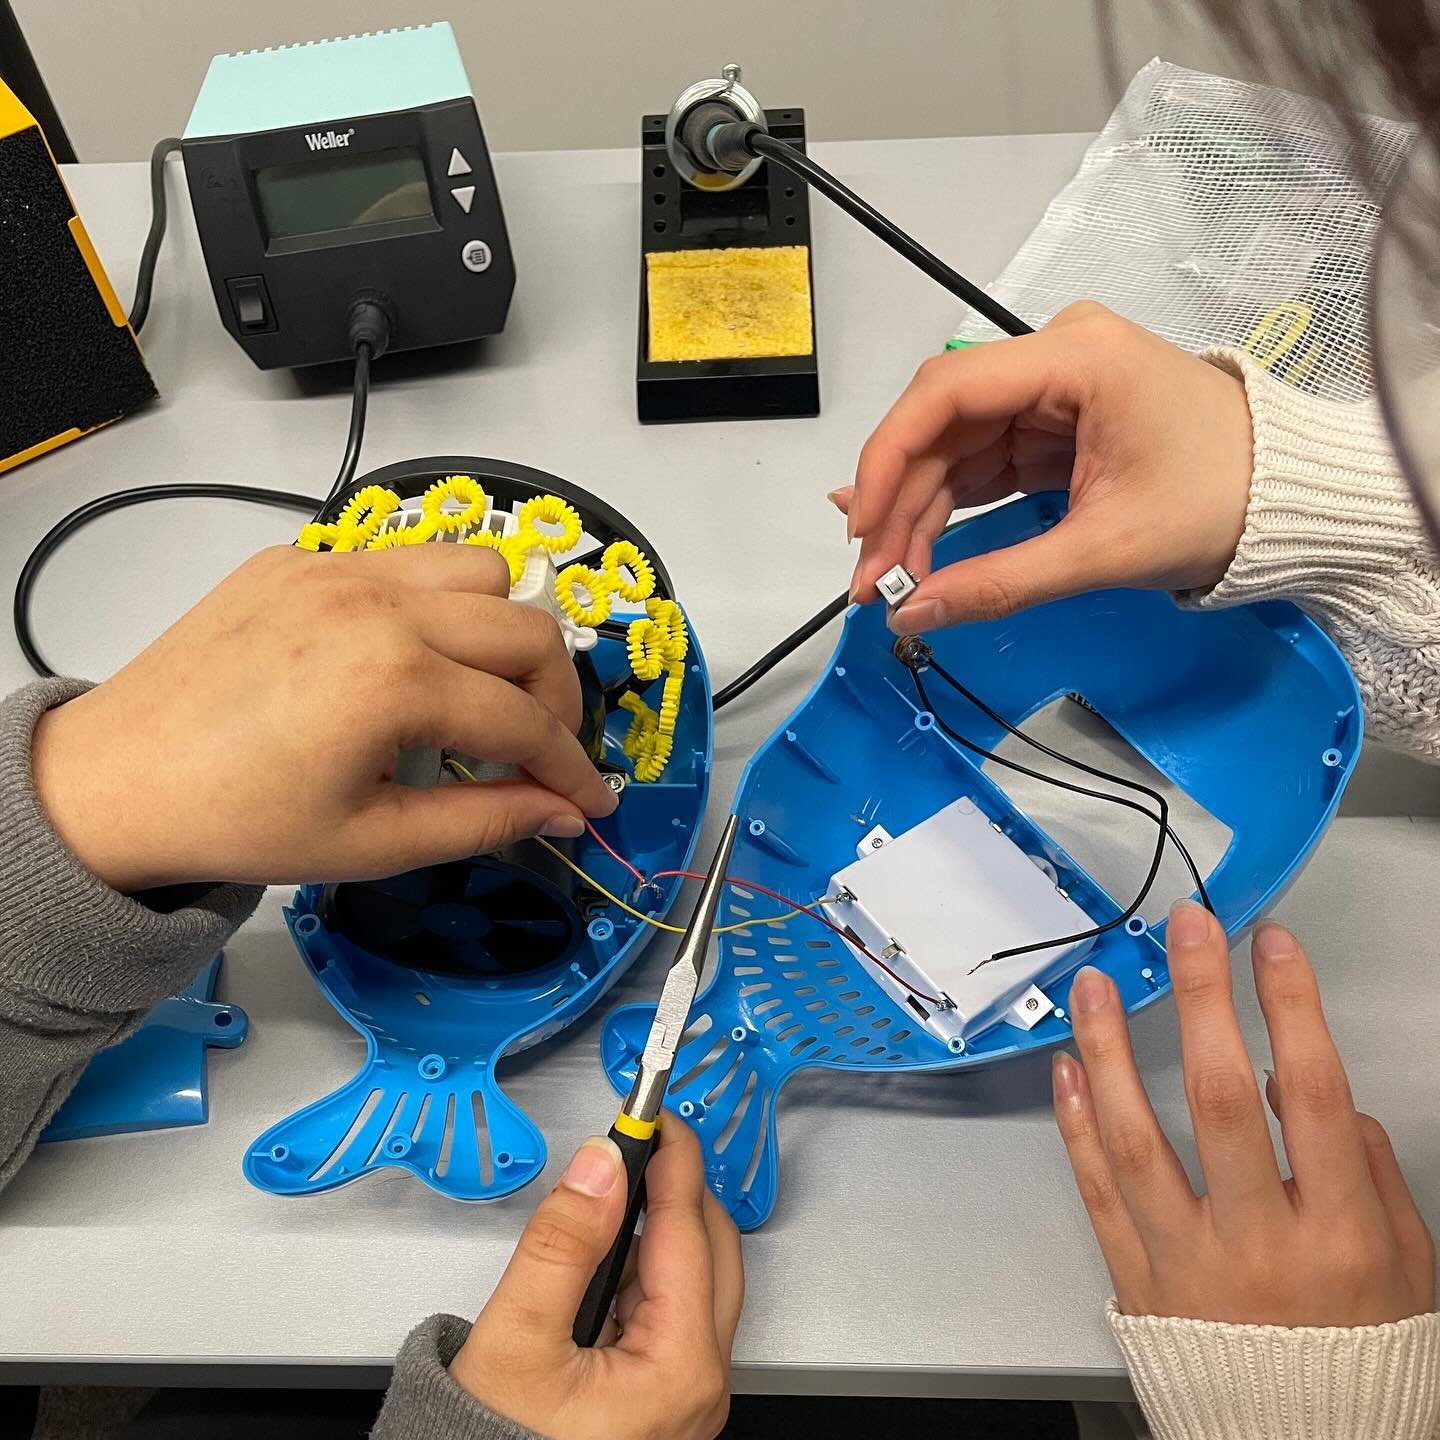 We recently held our first fix-it event two weeks ago. Attendees were able to successfully troubleshoot and repair 6 toys that needed some TLC Including some bubble whales and an Uno Attack. Thank you to all who attended and we&rsquo;ll see you at ou